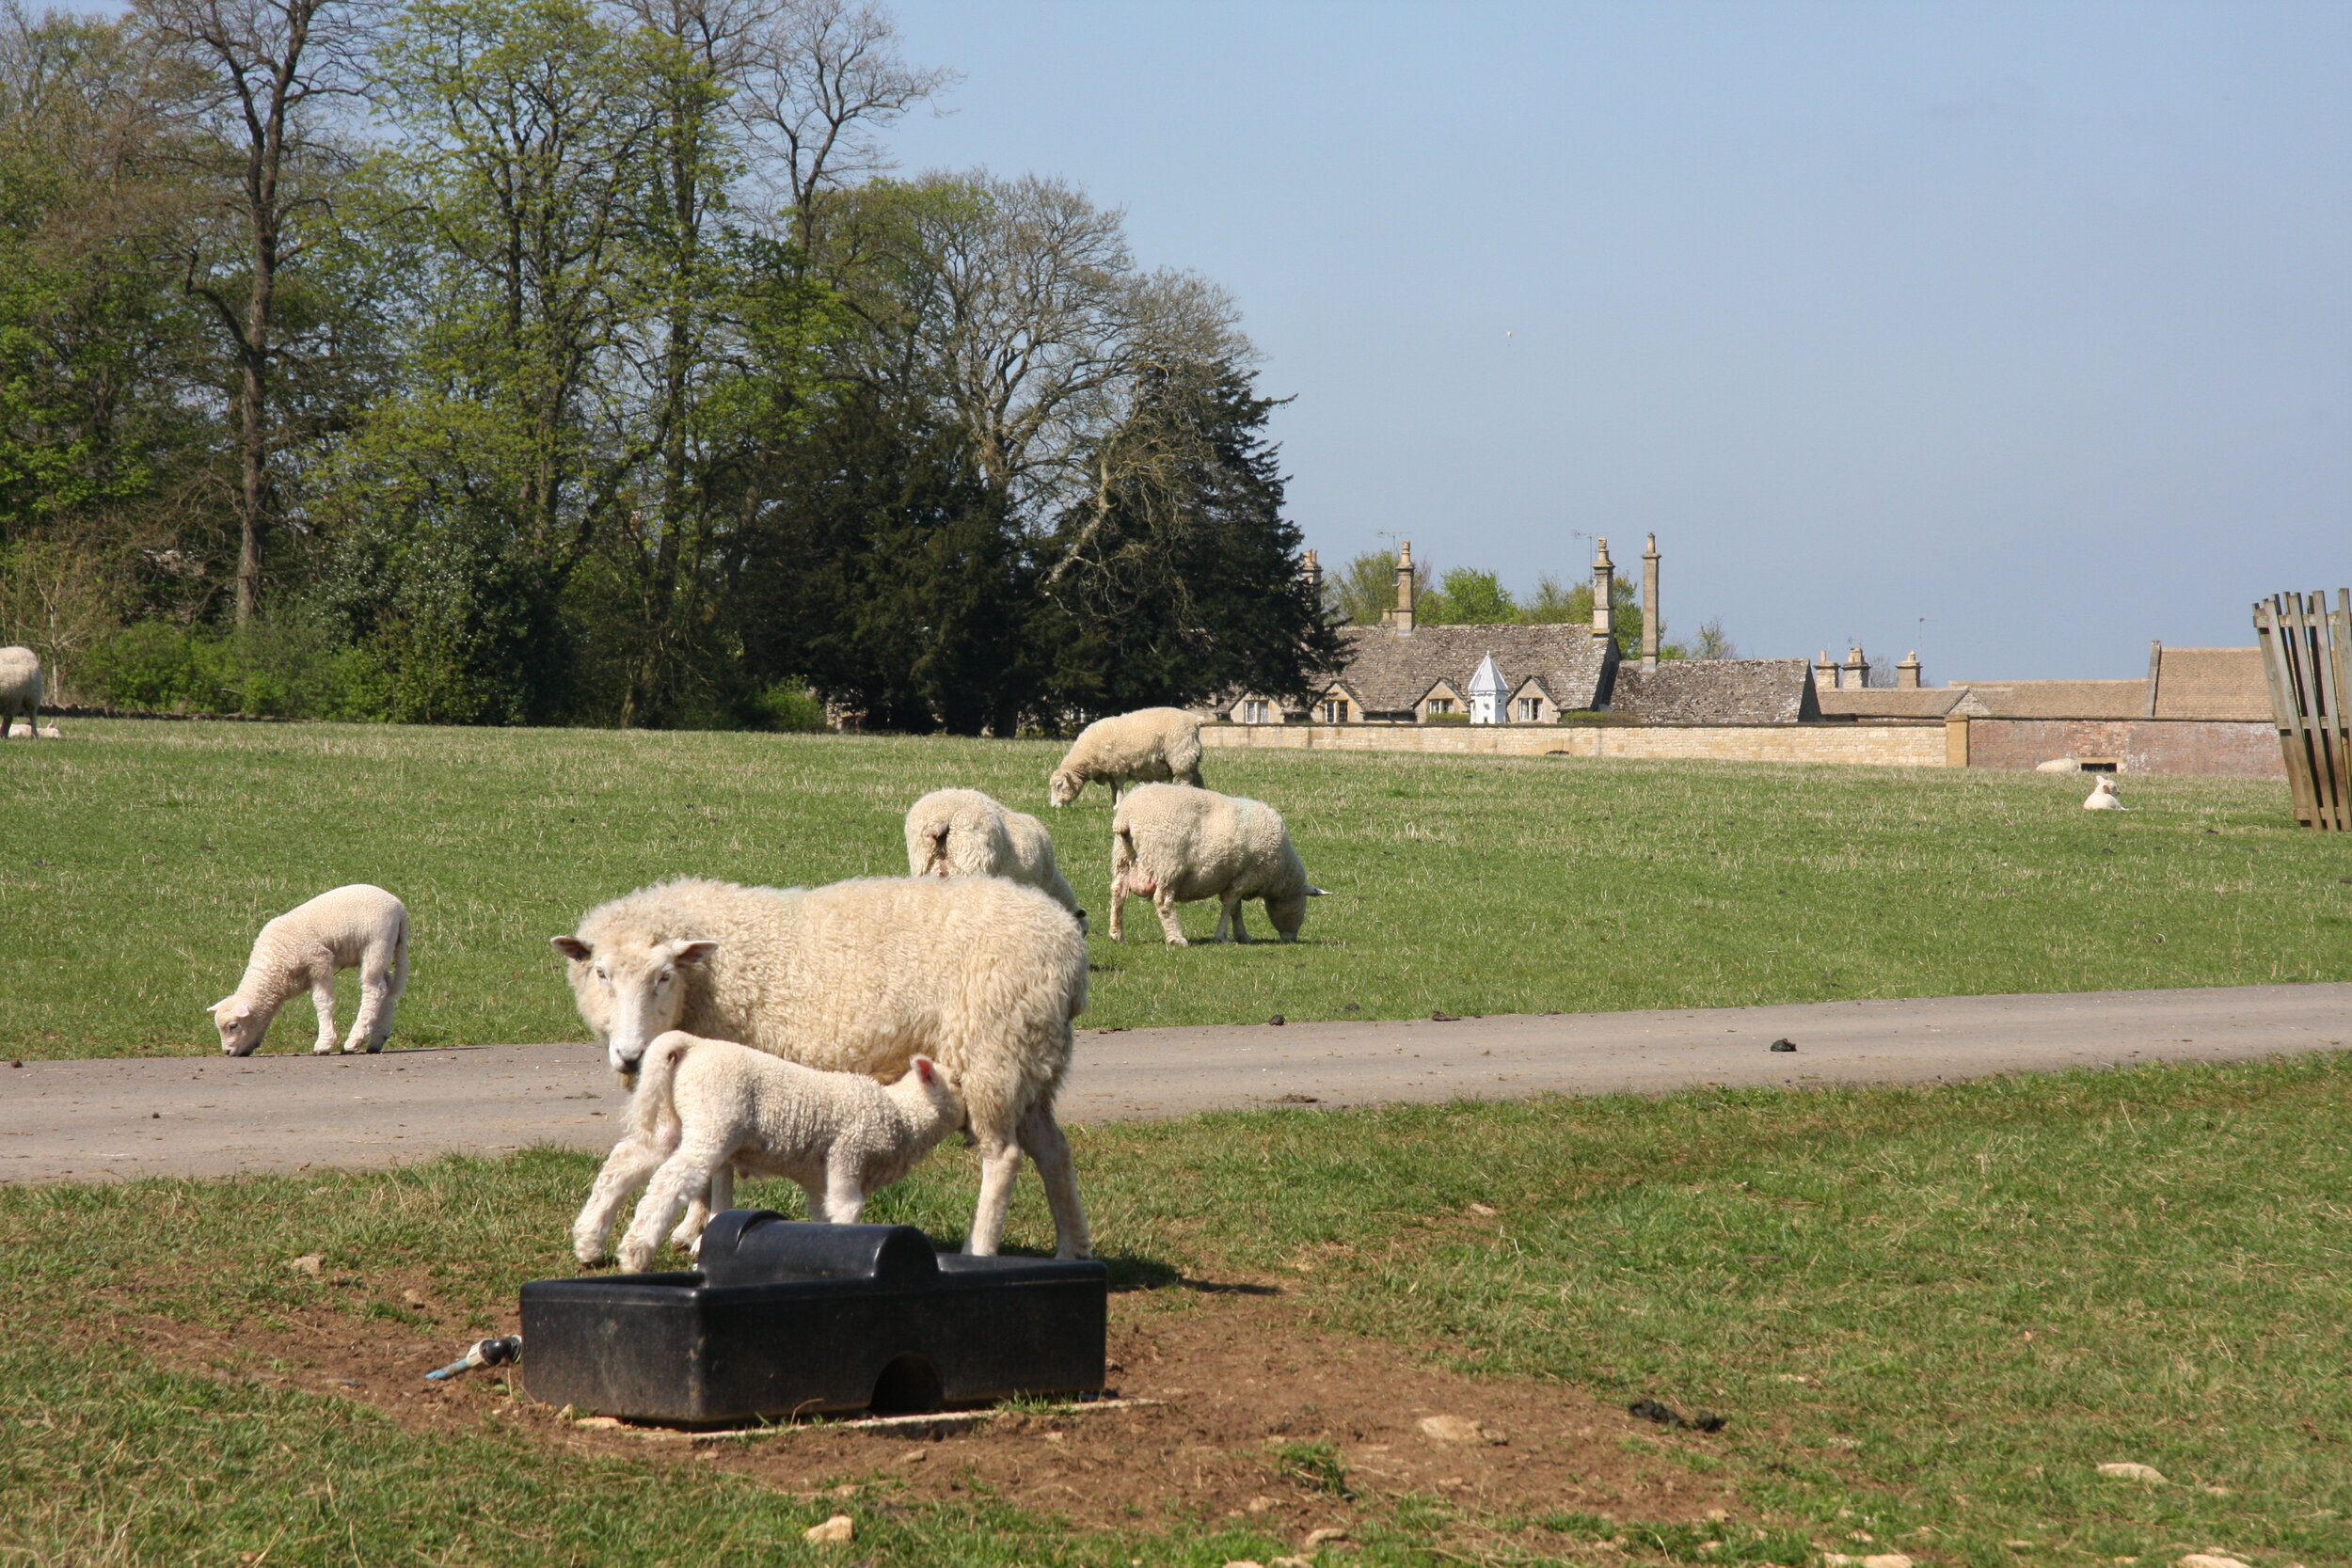 Sheep Eating Grass With Buildings In The background